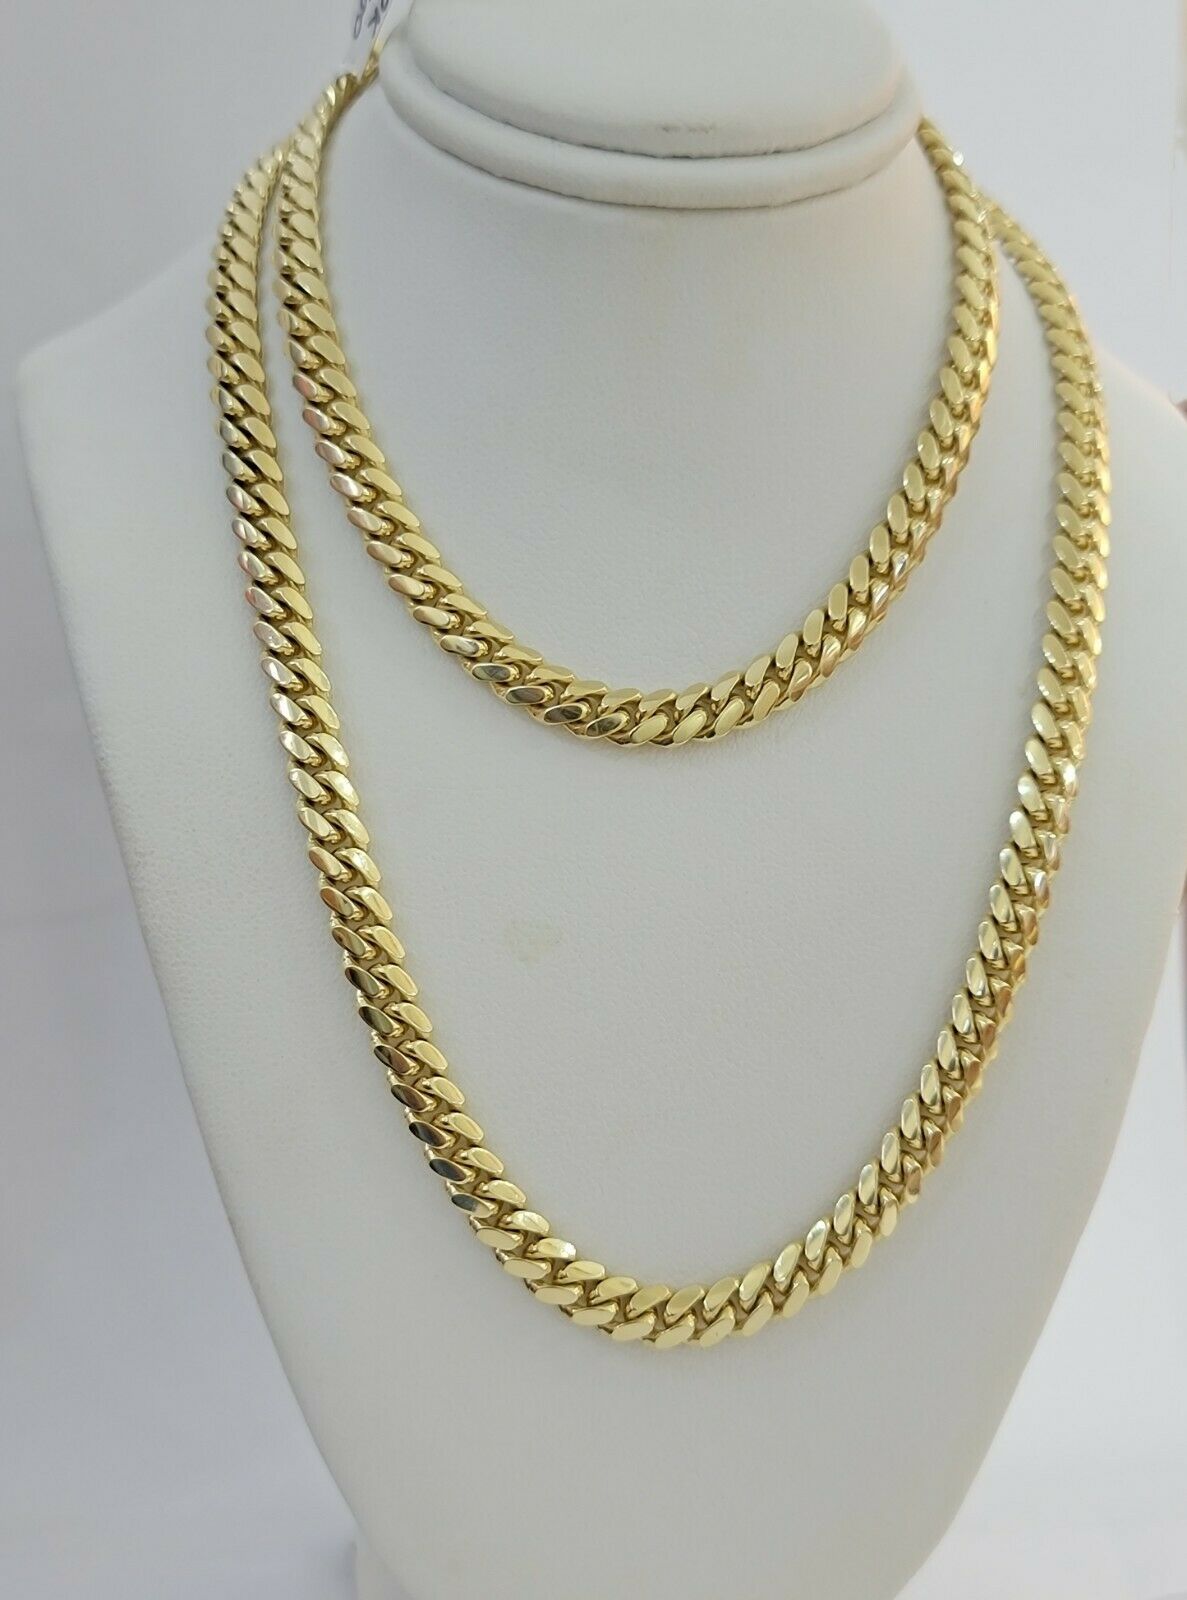 REAL 14k Gold Chain Solid Link 24